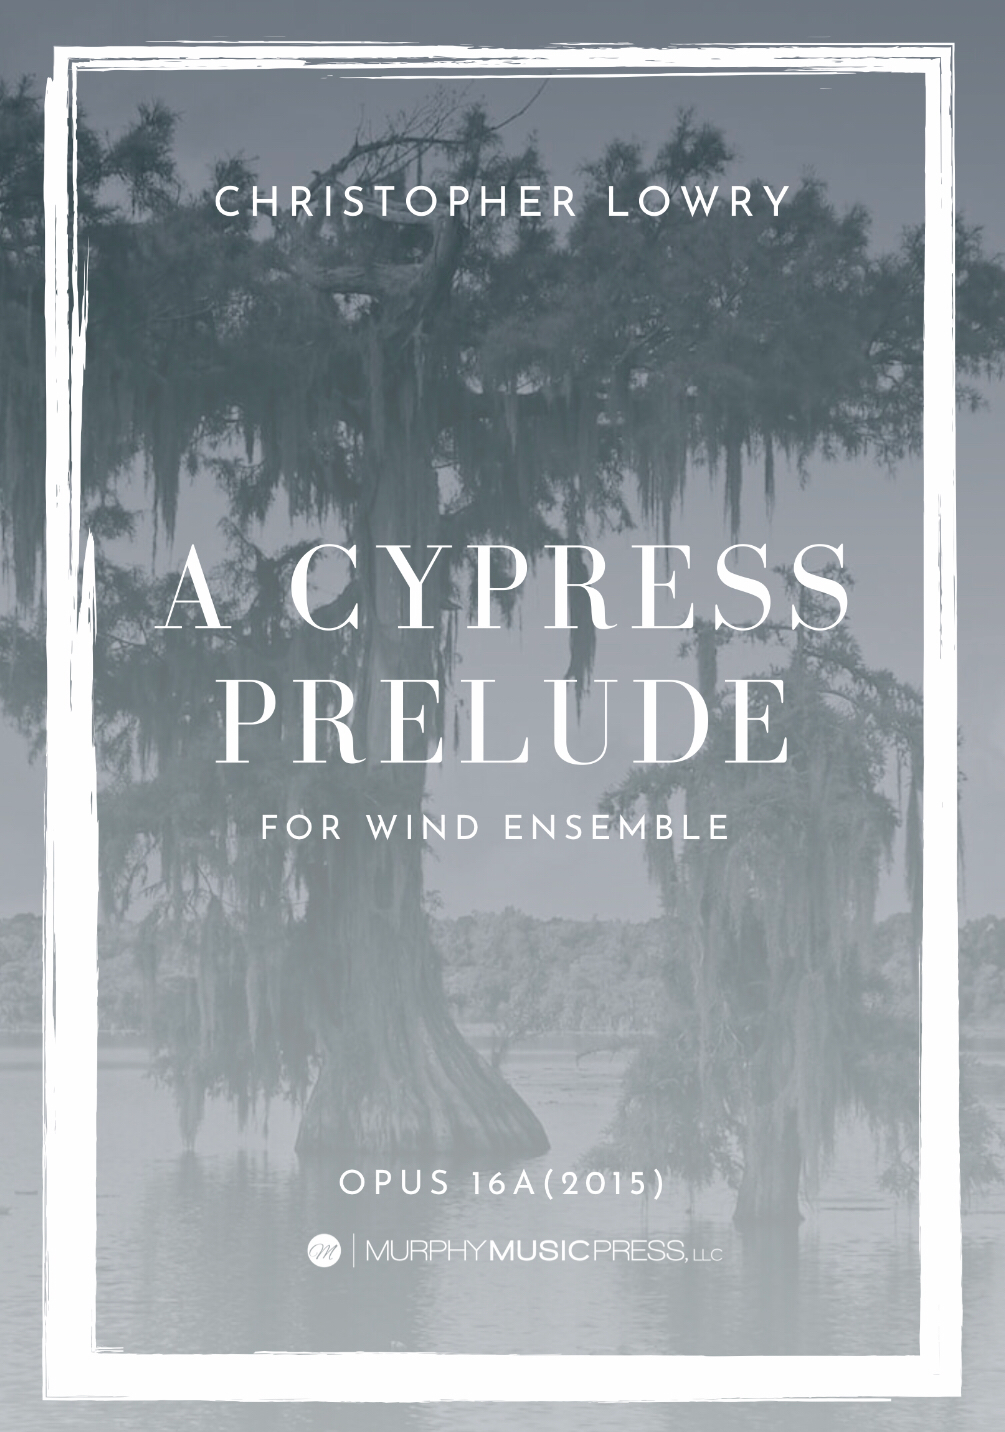 A Cypress Prelude  by Christopher Lowry